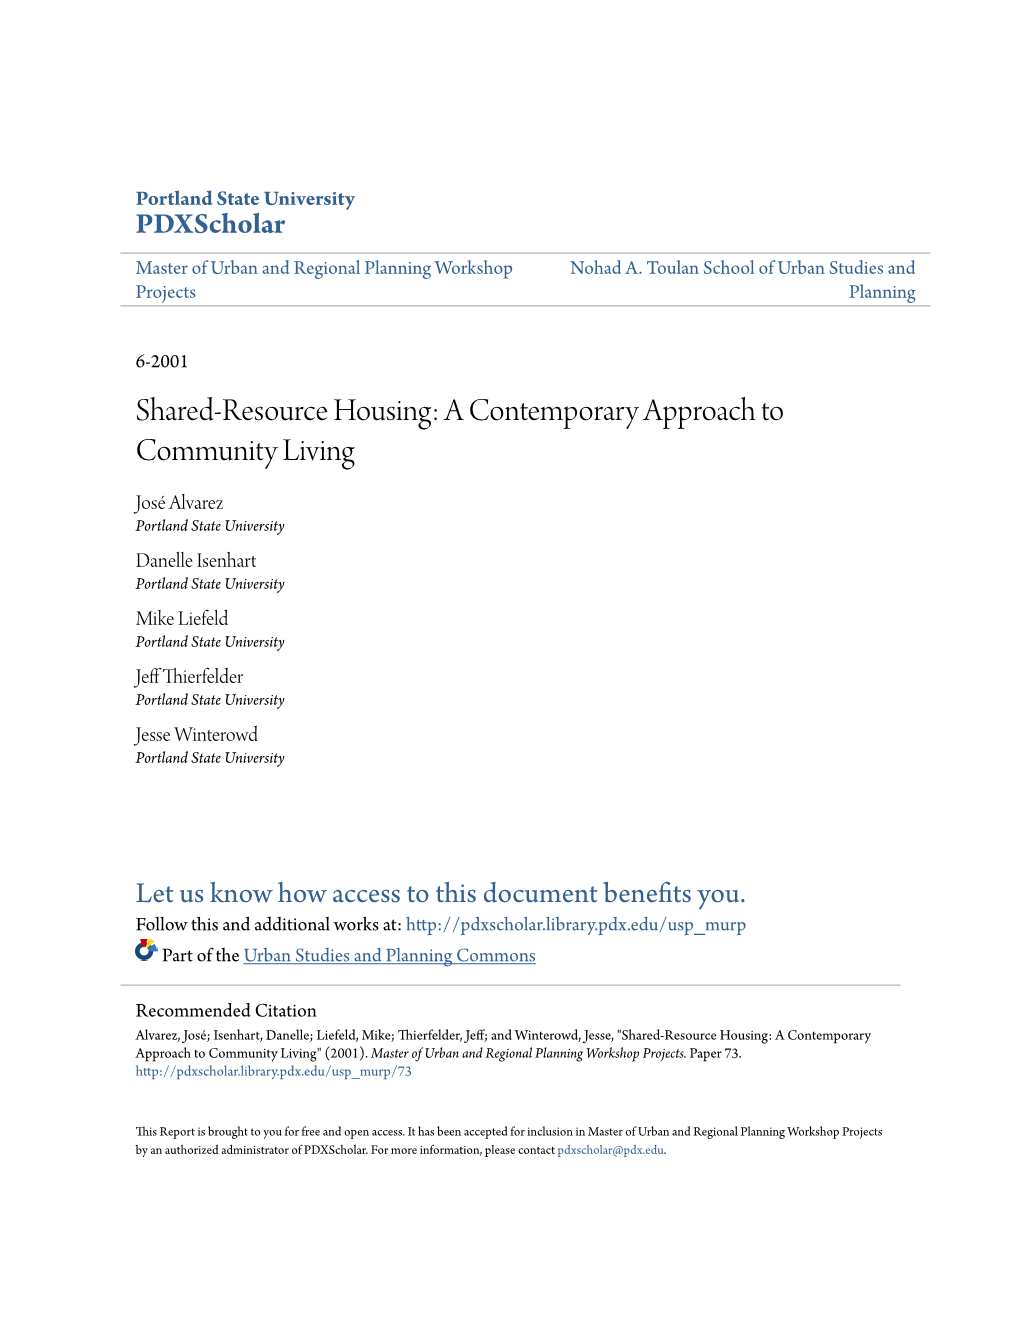 Shared-Resource Housing: a Contemporary Approach to Community Living